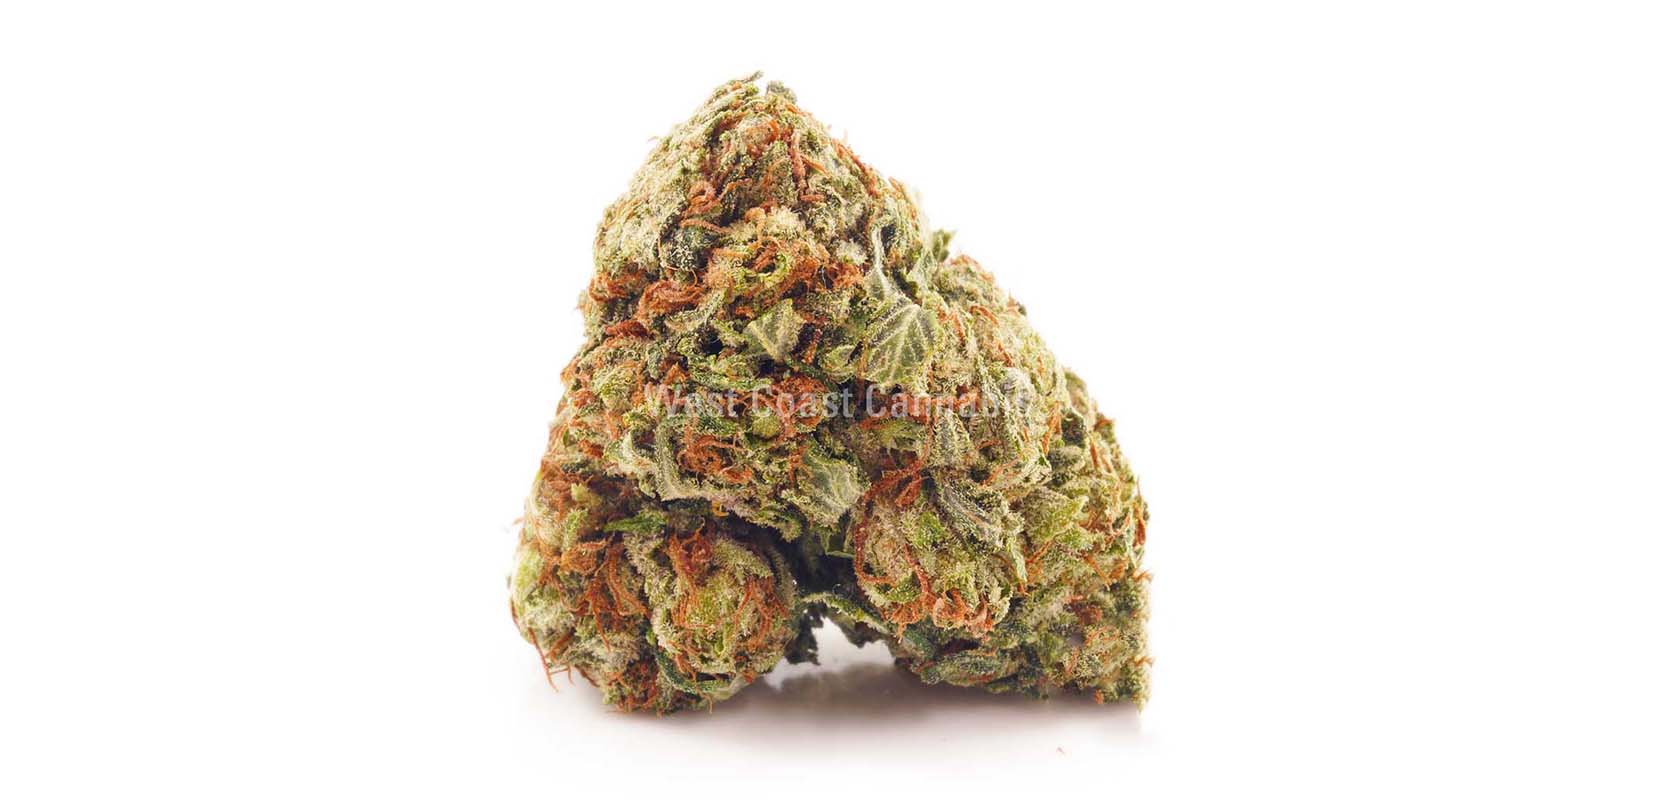 OG Kush weed online Canada at West Coast Cannabis online dispensary for BC bud online. weed shop. budmail. buy weed online canada. gummys and vape pens.